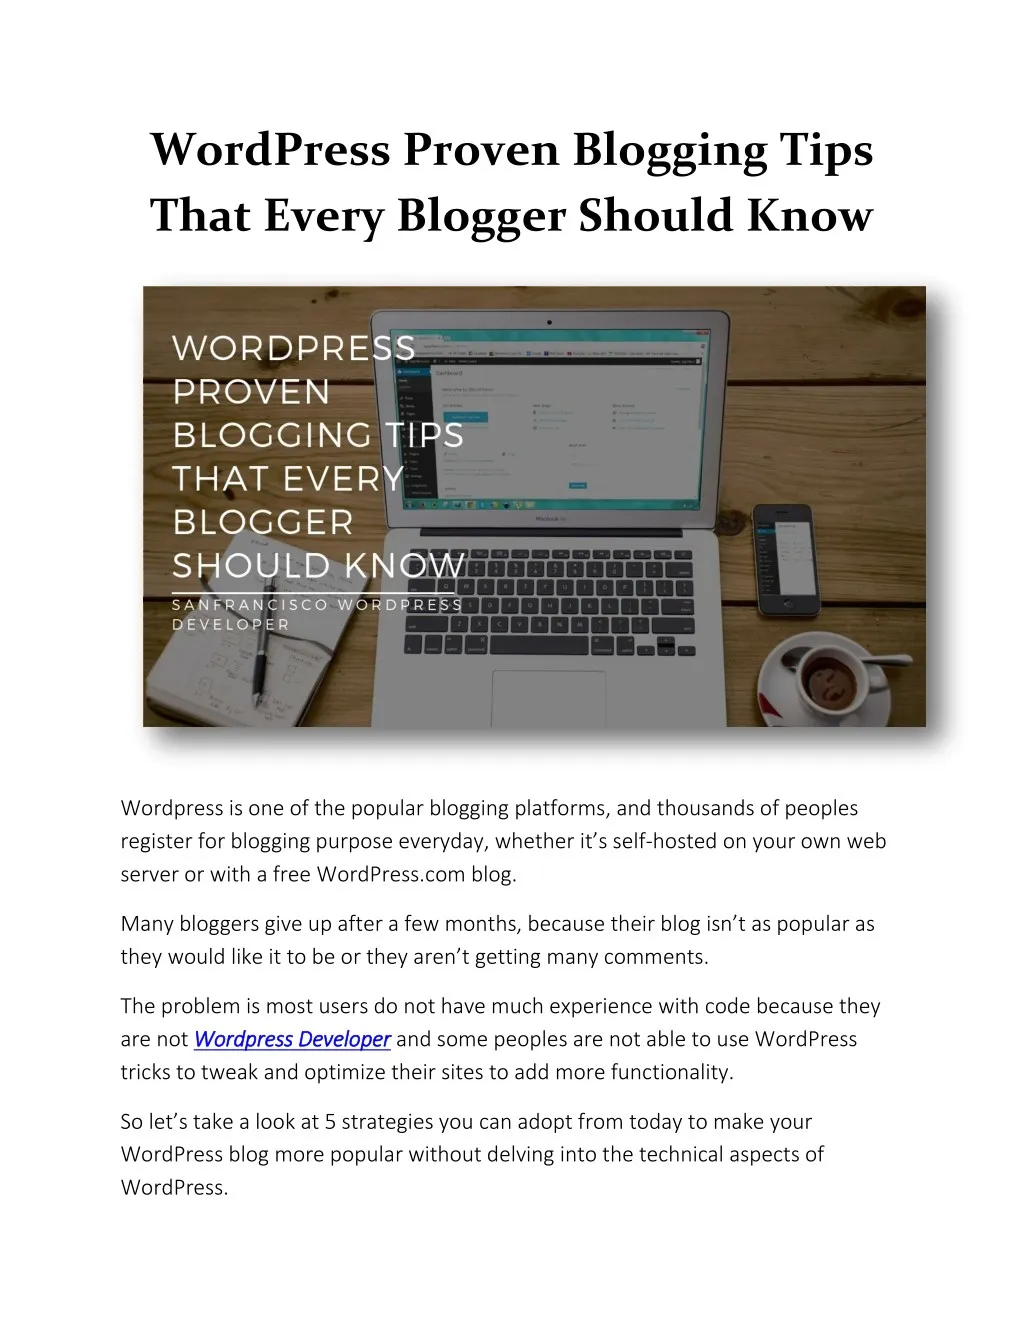 wordpress proven blogging tips that every blogger